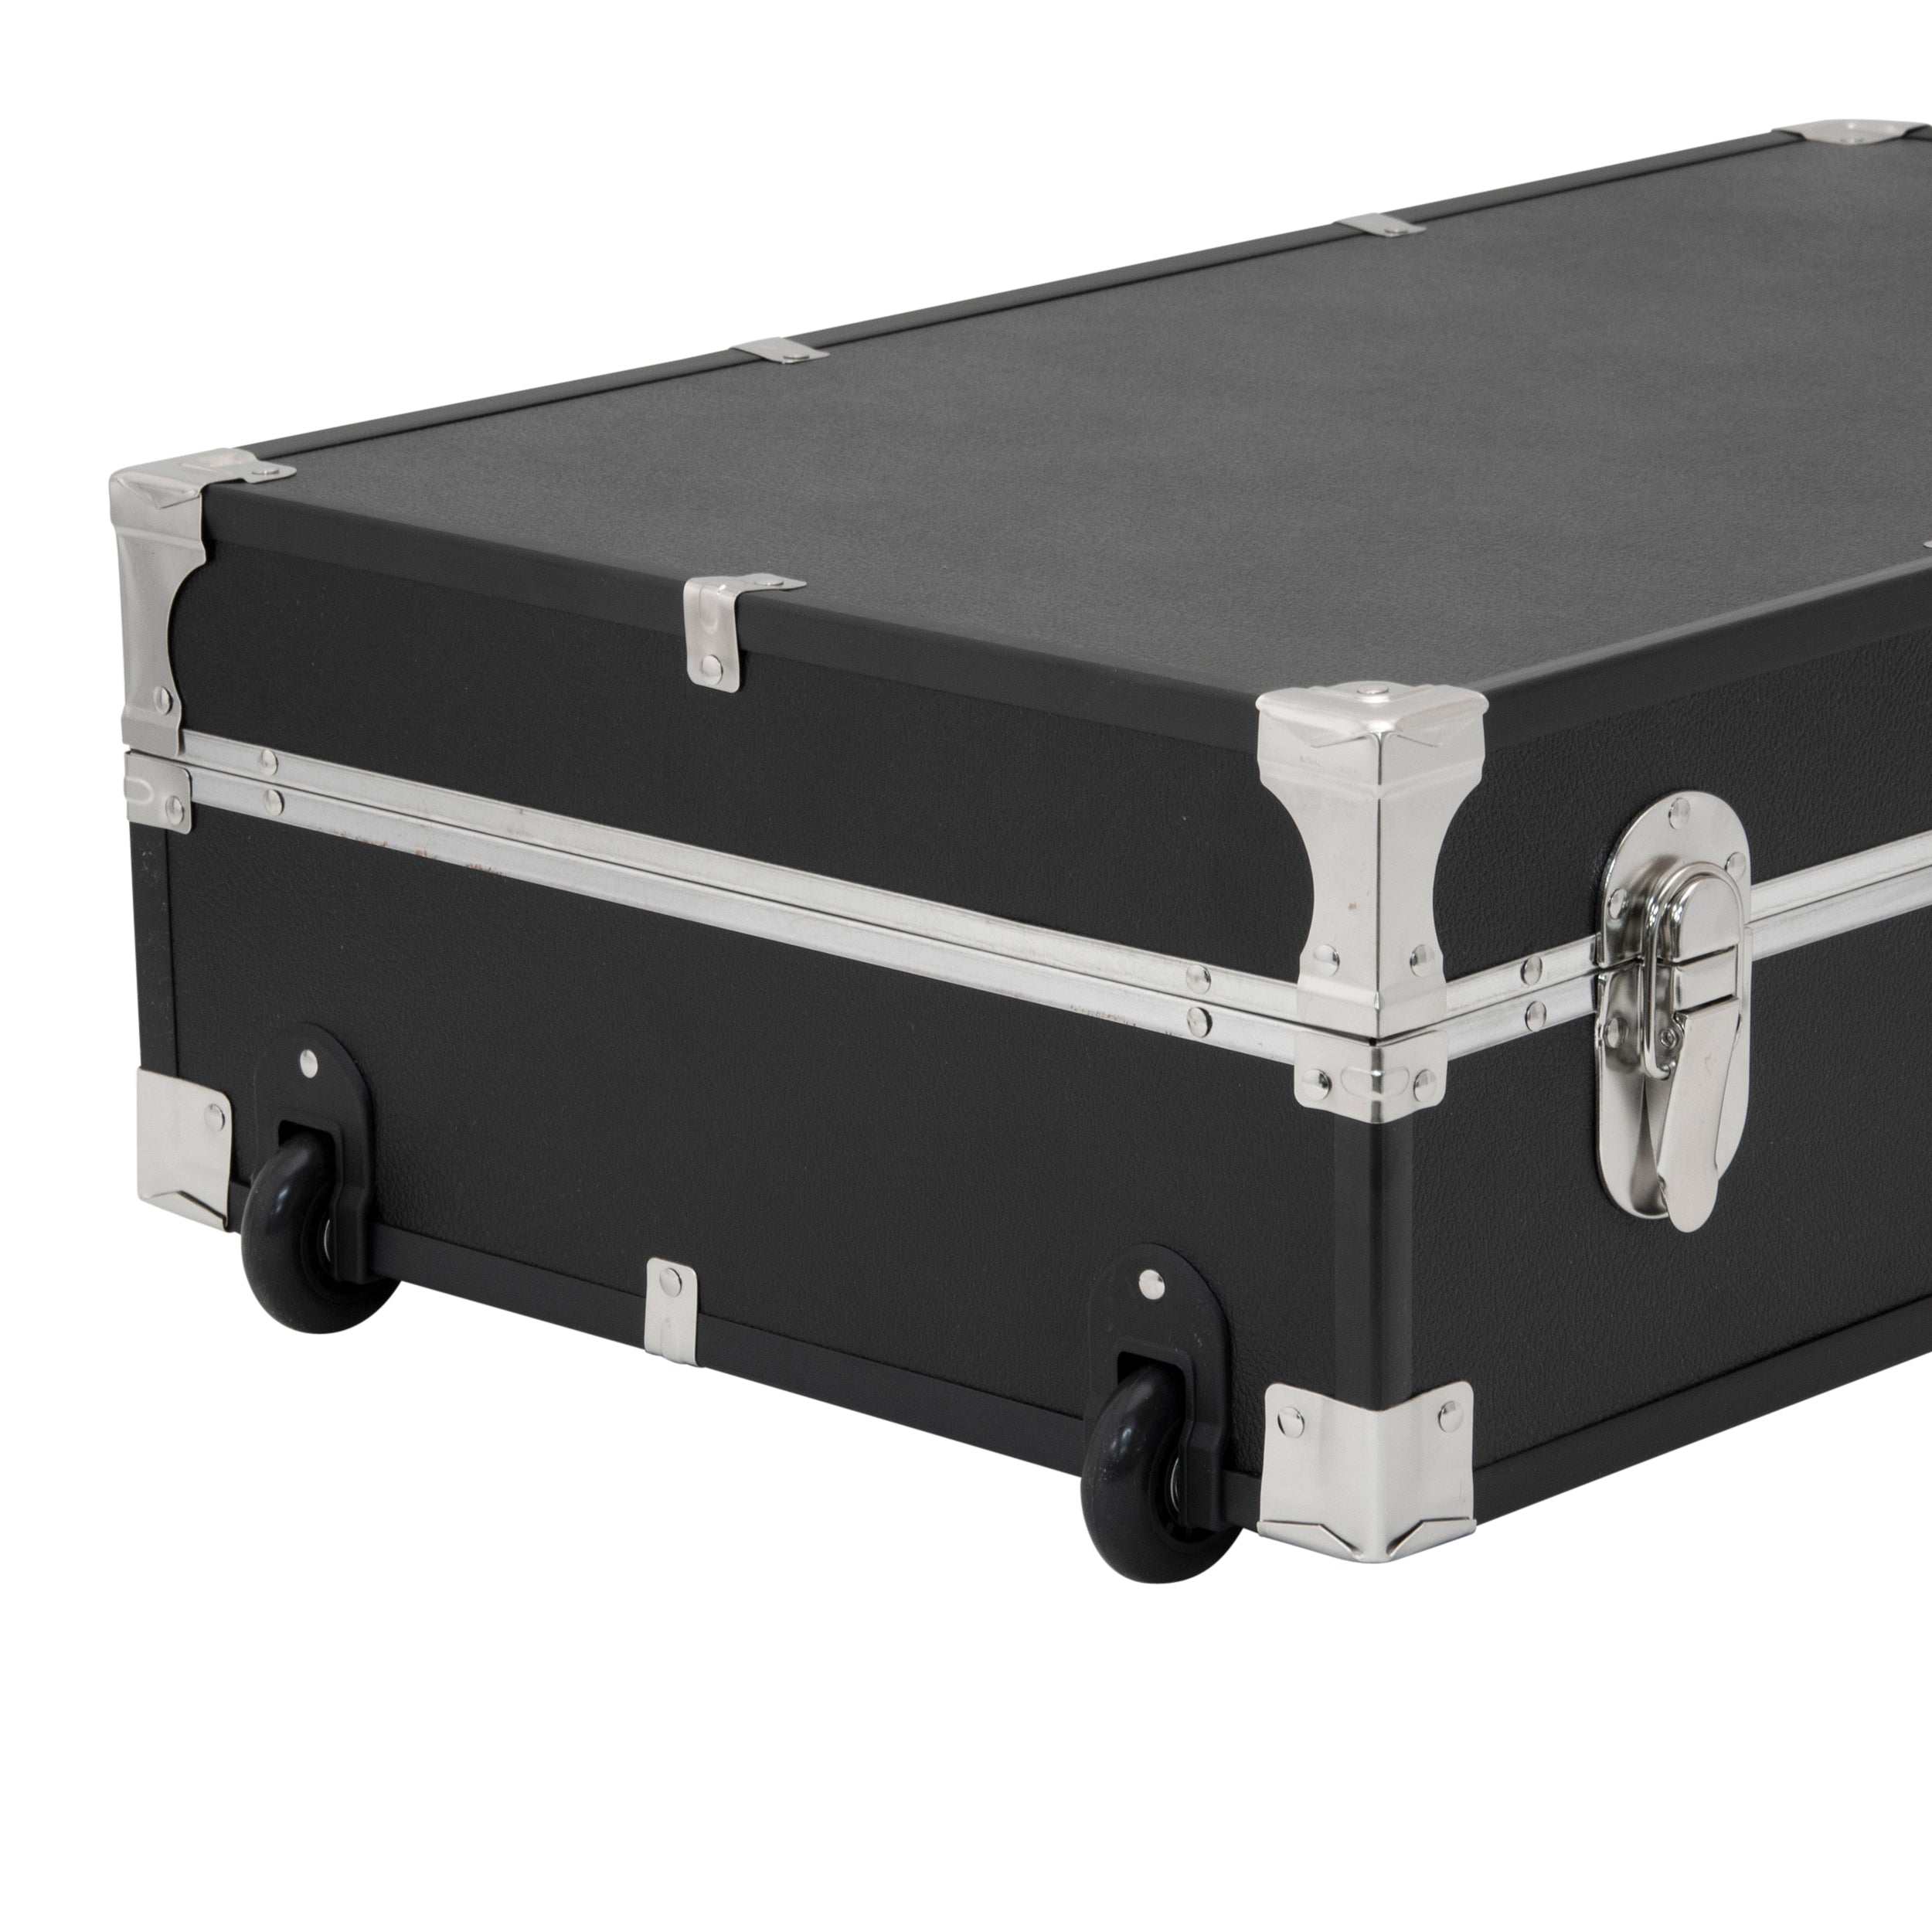 Wheels for easy moving - Seward Under the Bed 31" Trunk with Wheels & Lock, Black